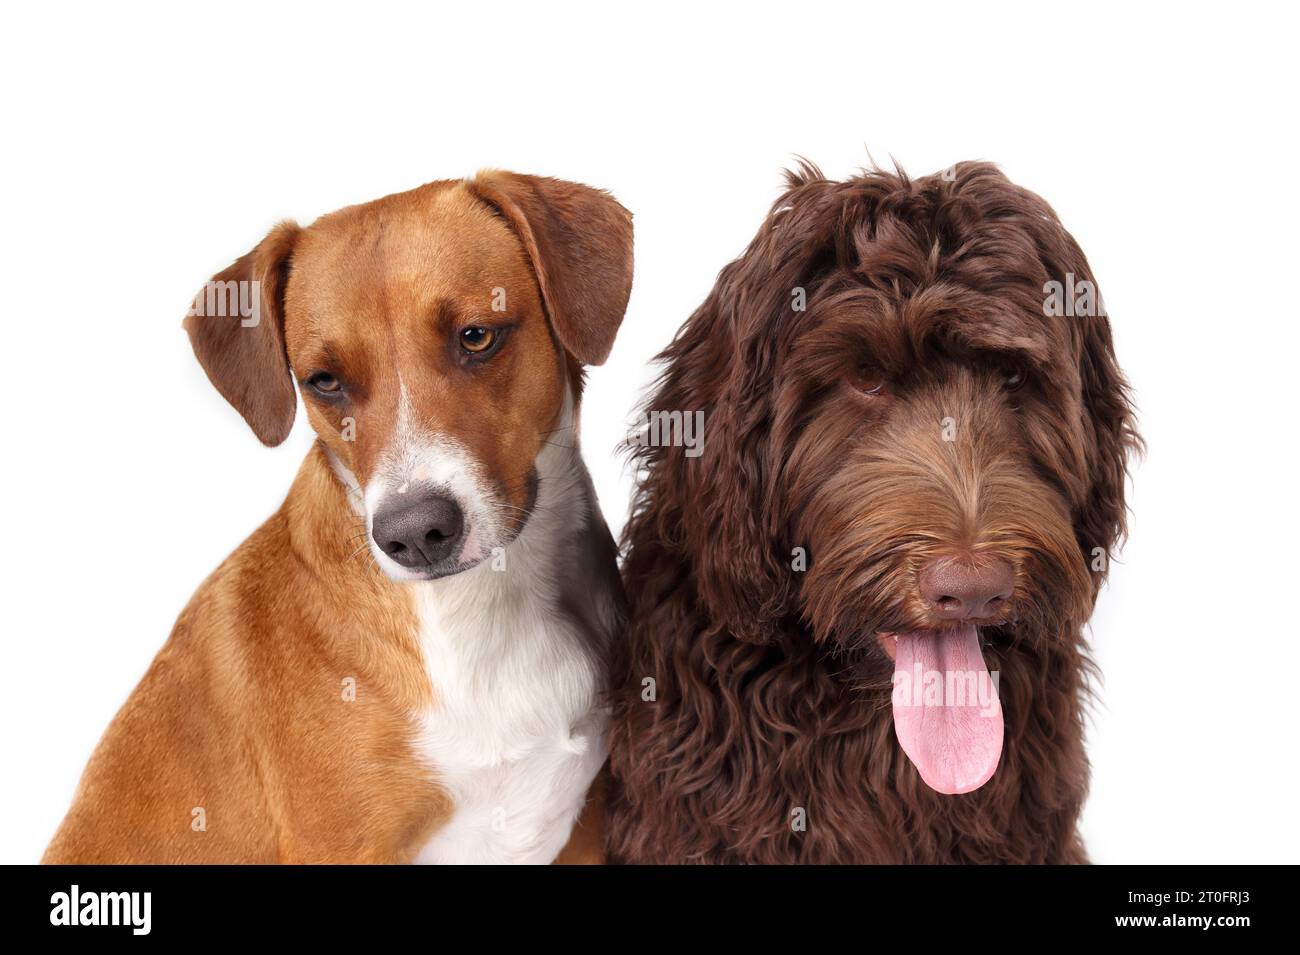 Two dogs sitting relaxed next to each other. Head shots of two puppy dog friends side by side. 1 year old female Harrier mix and 6 month old female La Stock Photo